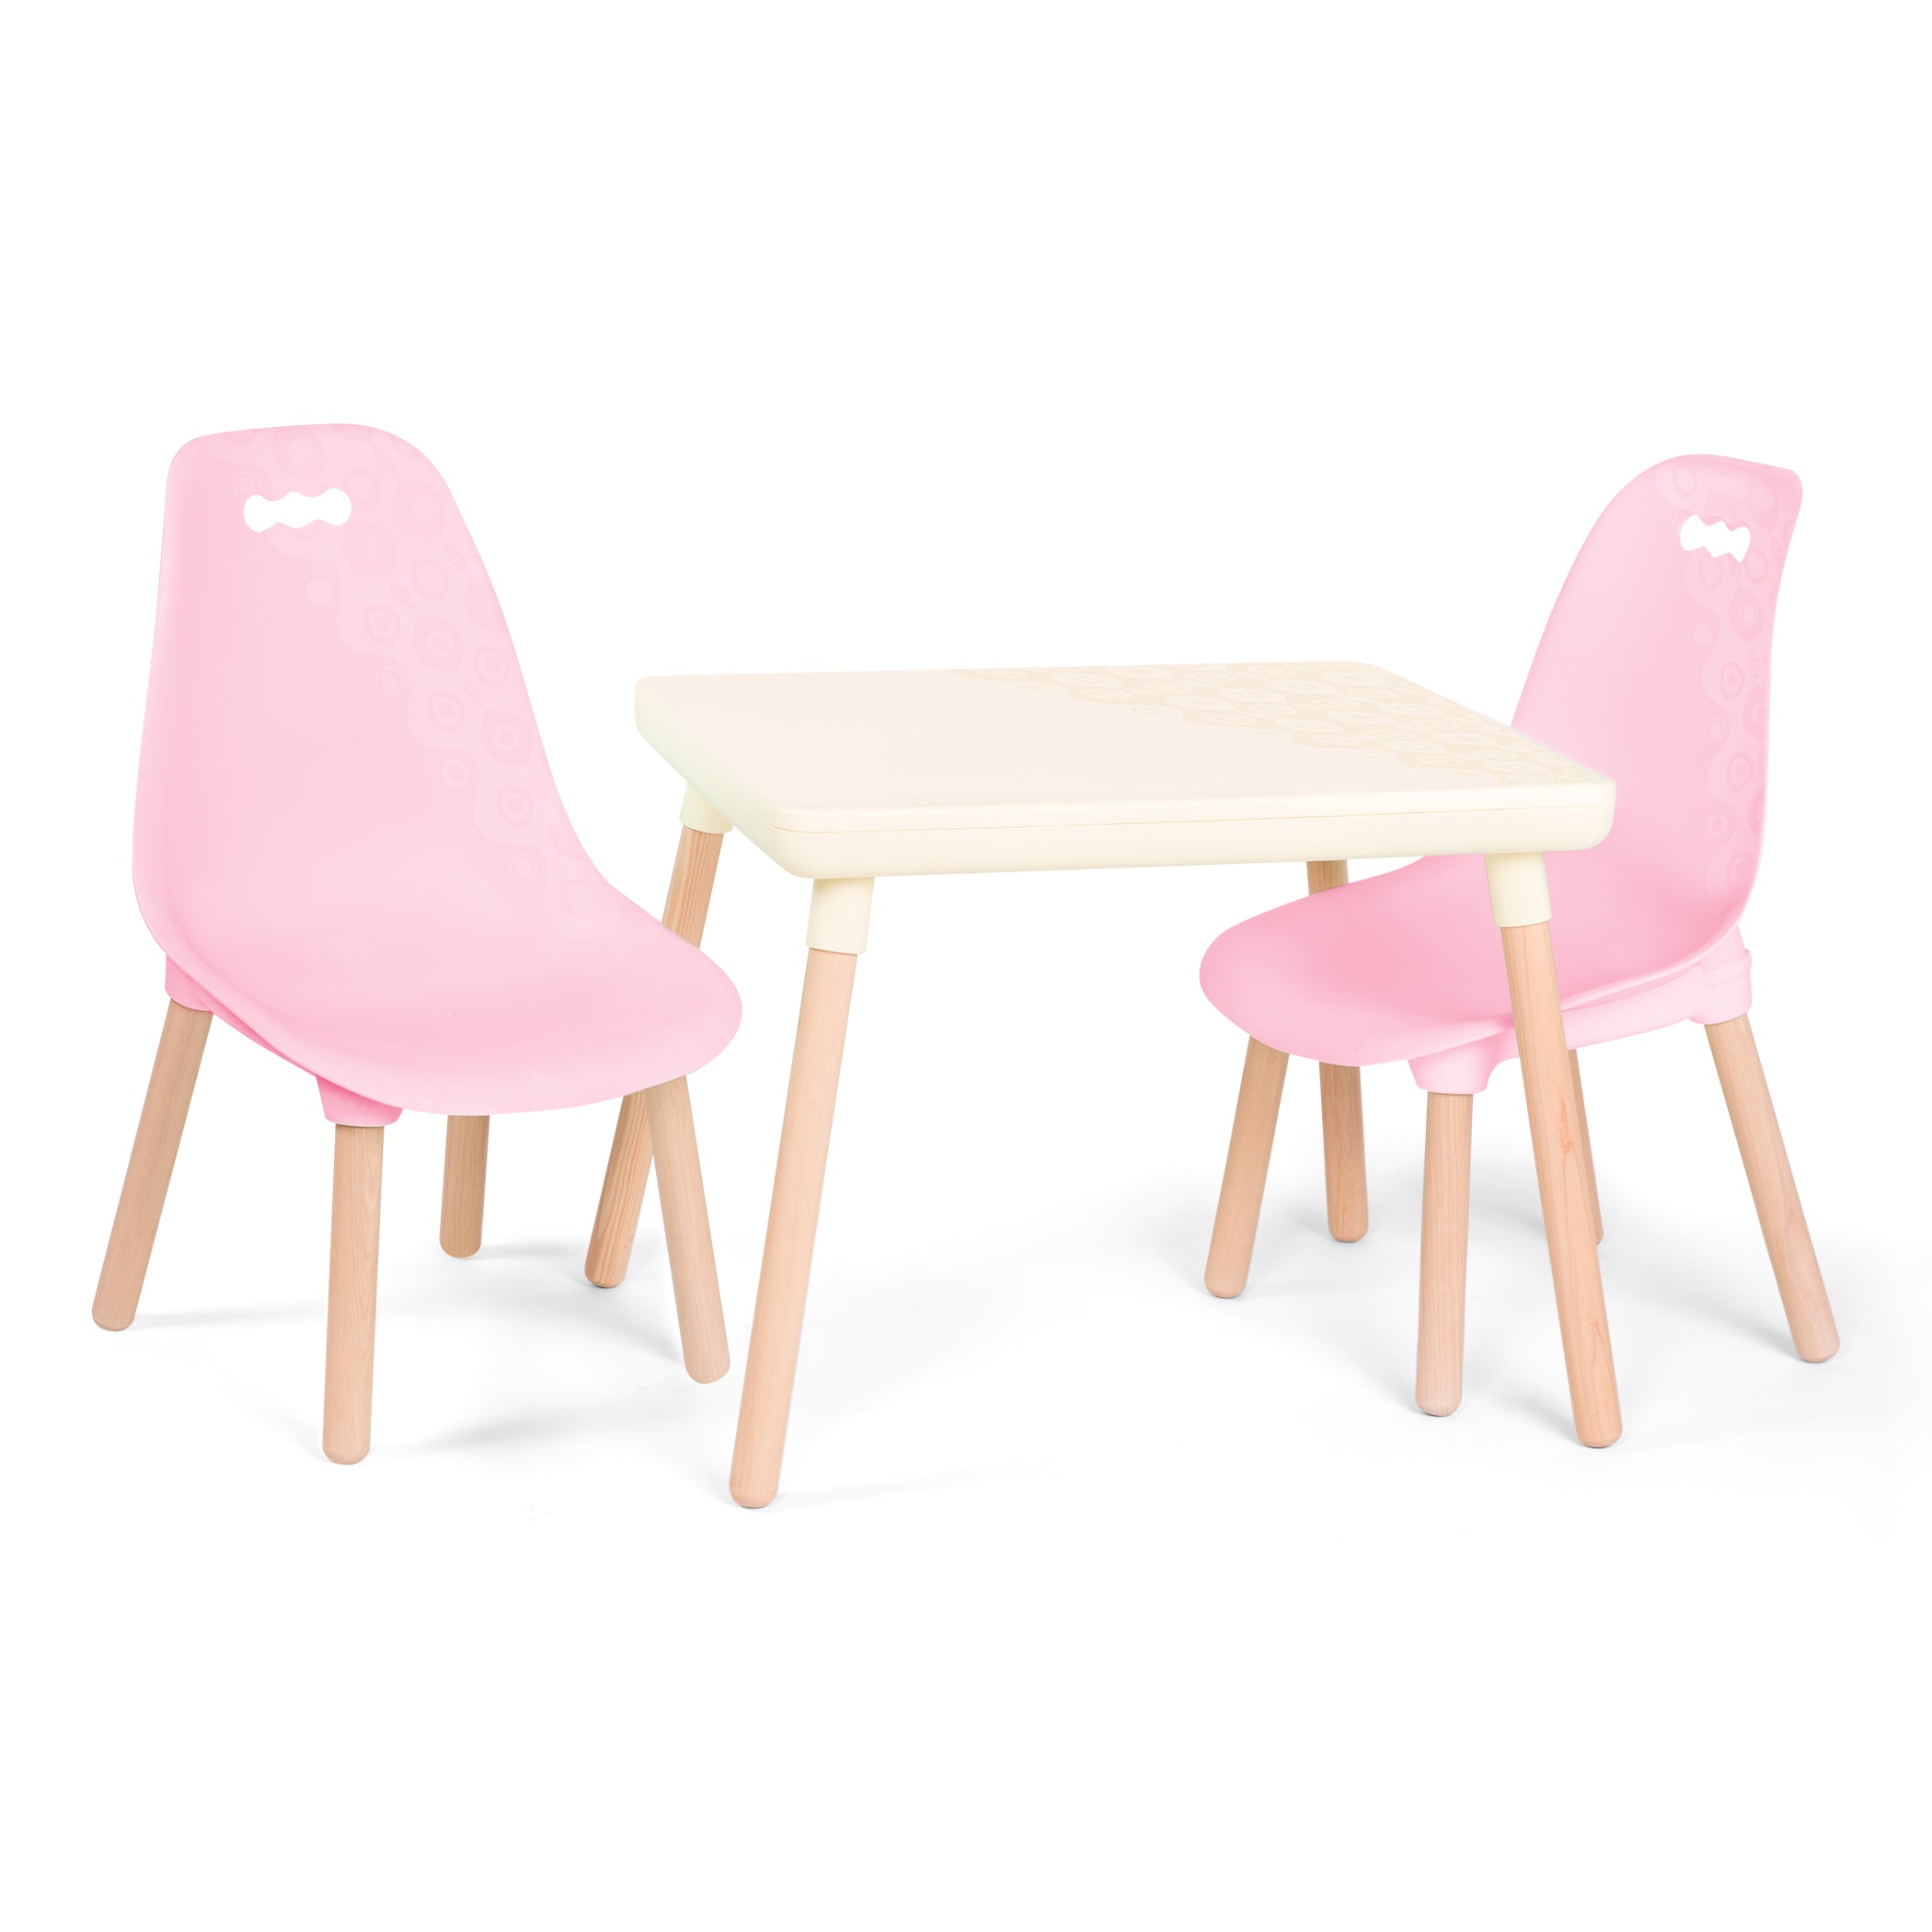 Table and chair set for kids.